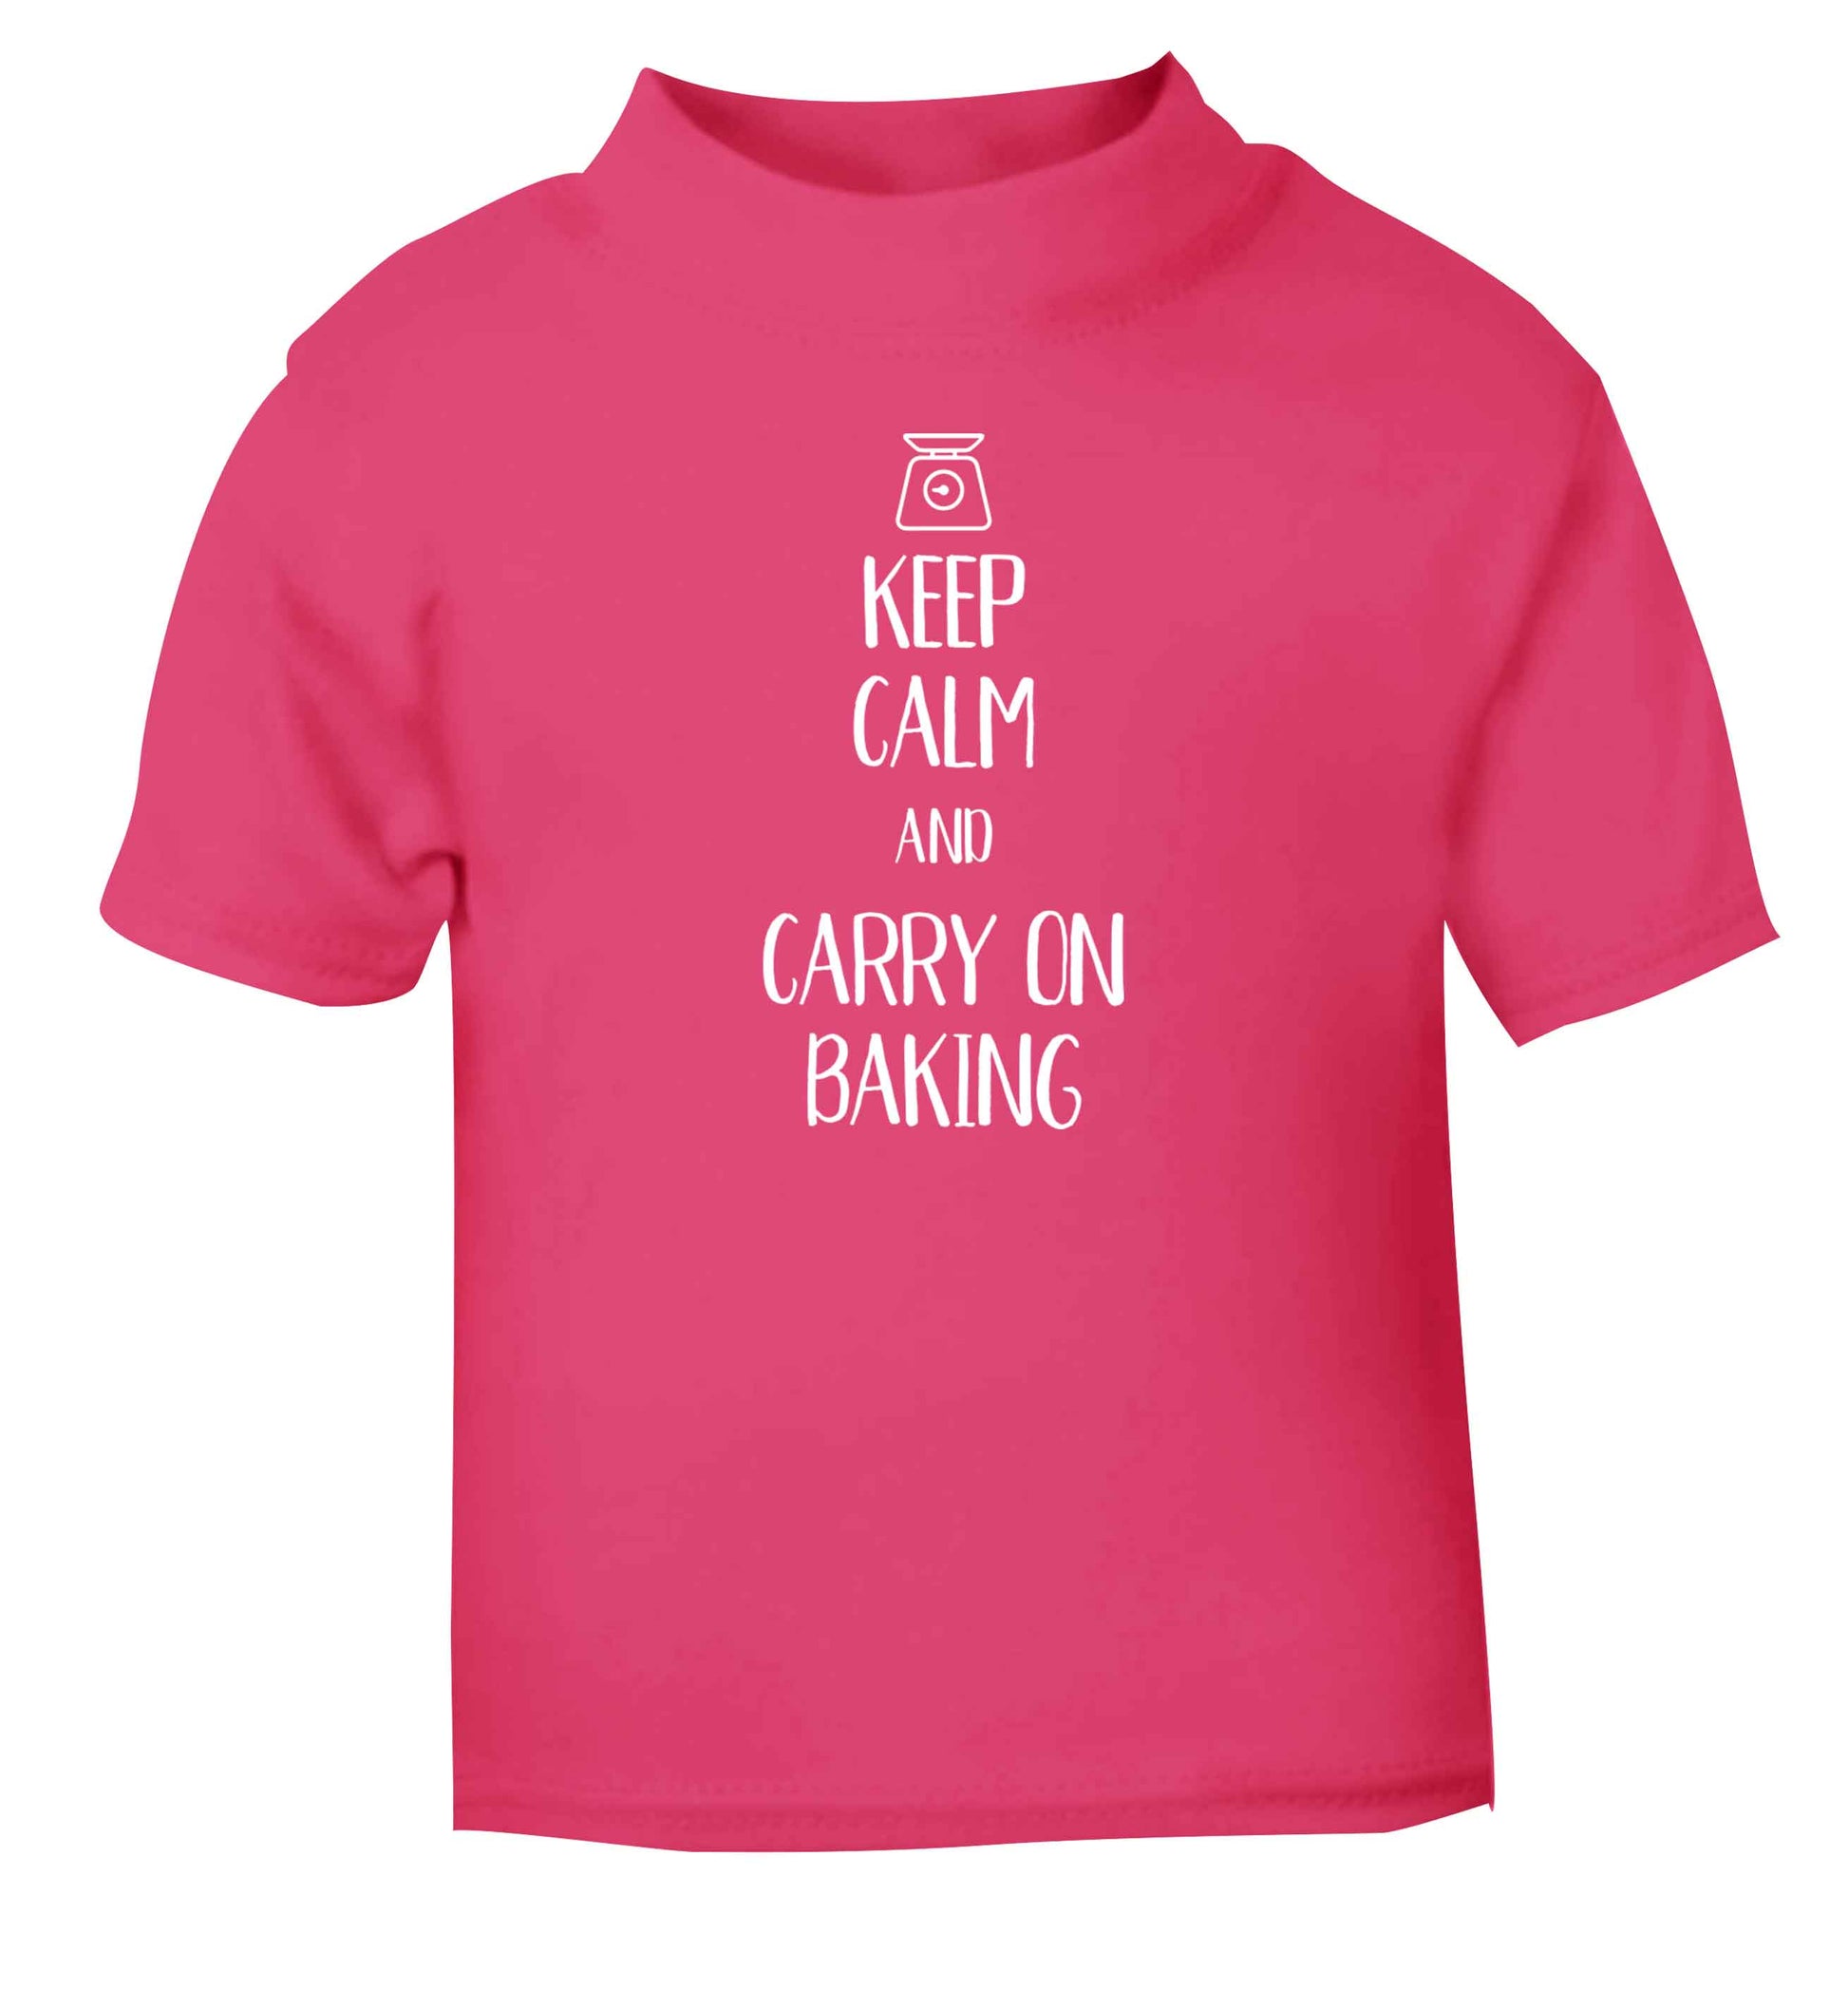 Keep calm and carry on baking pink Baby Toddler Tshirt 2 Years